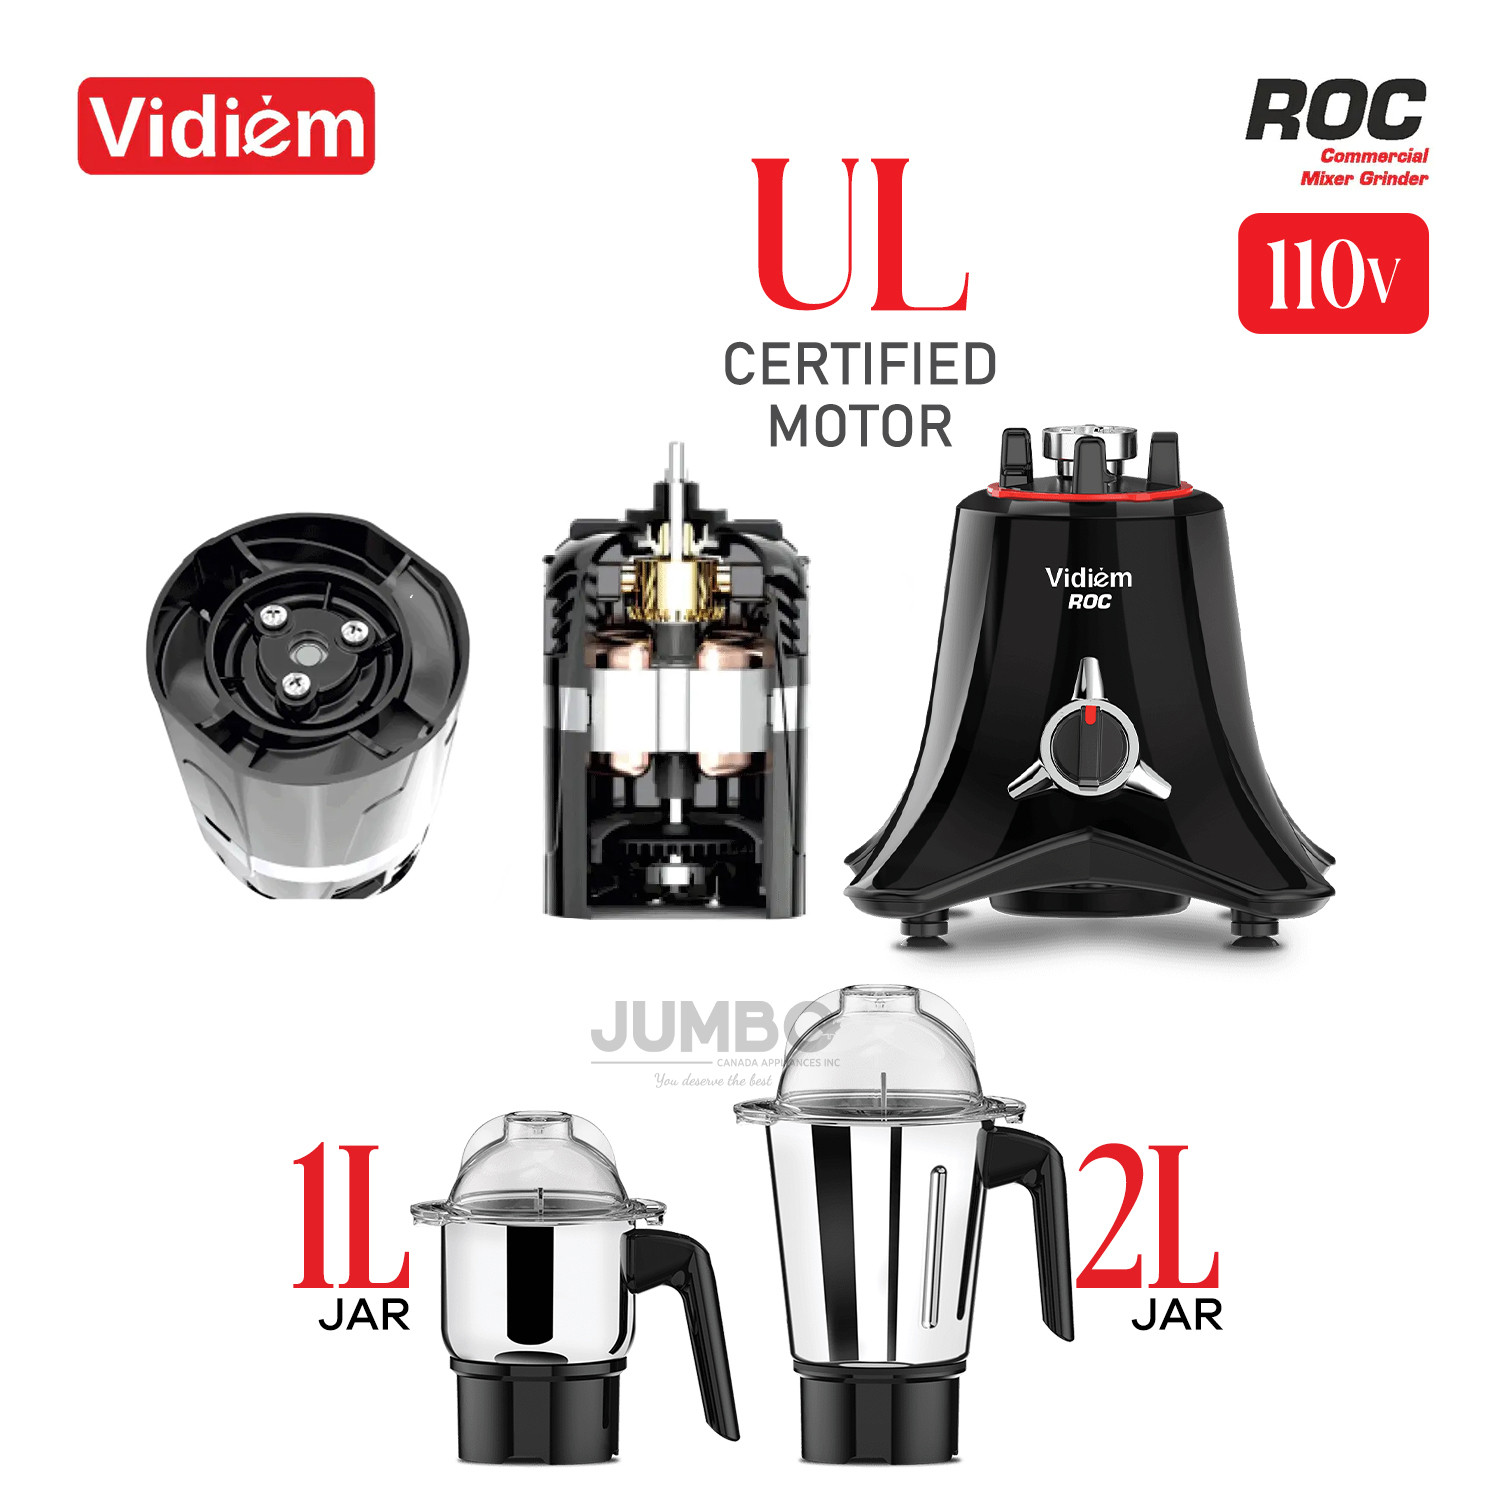 vidiem-roc-1200w-110v-commercial-residential-mixer-grinder-stainless-steel-jars-indian-mixer-grinder-spice-coffee-grinder-jar-for-use-in-canada-usa8